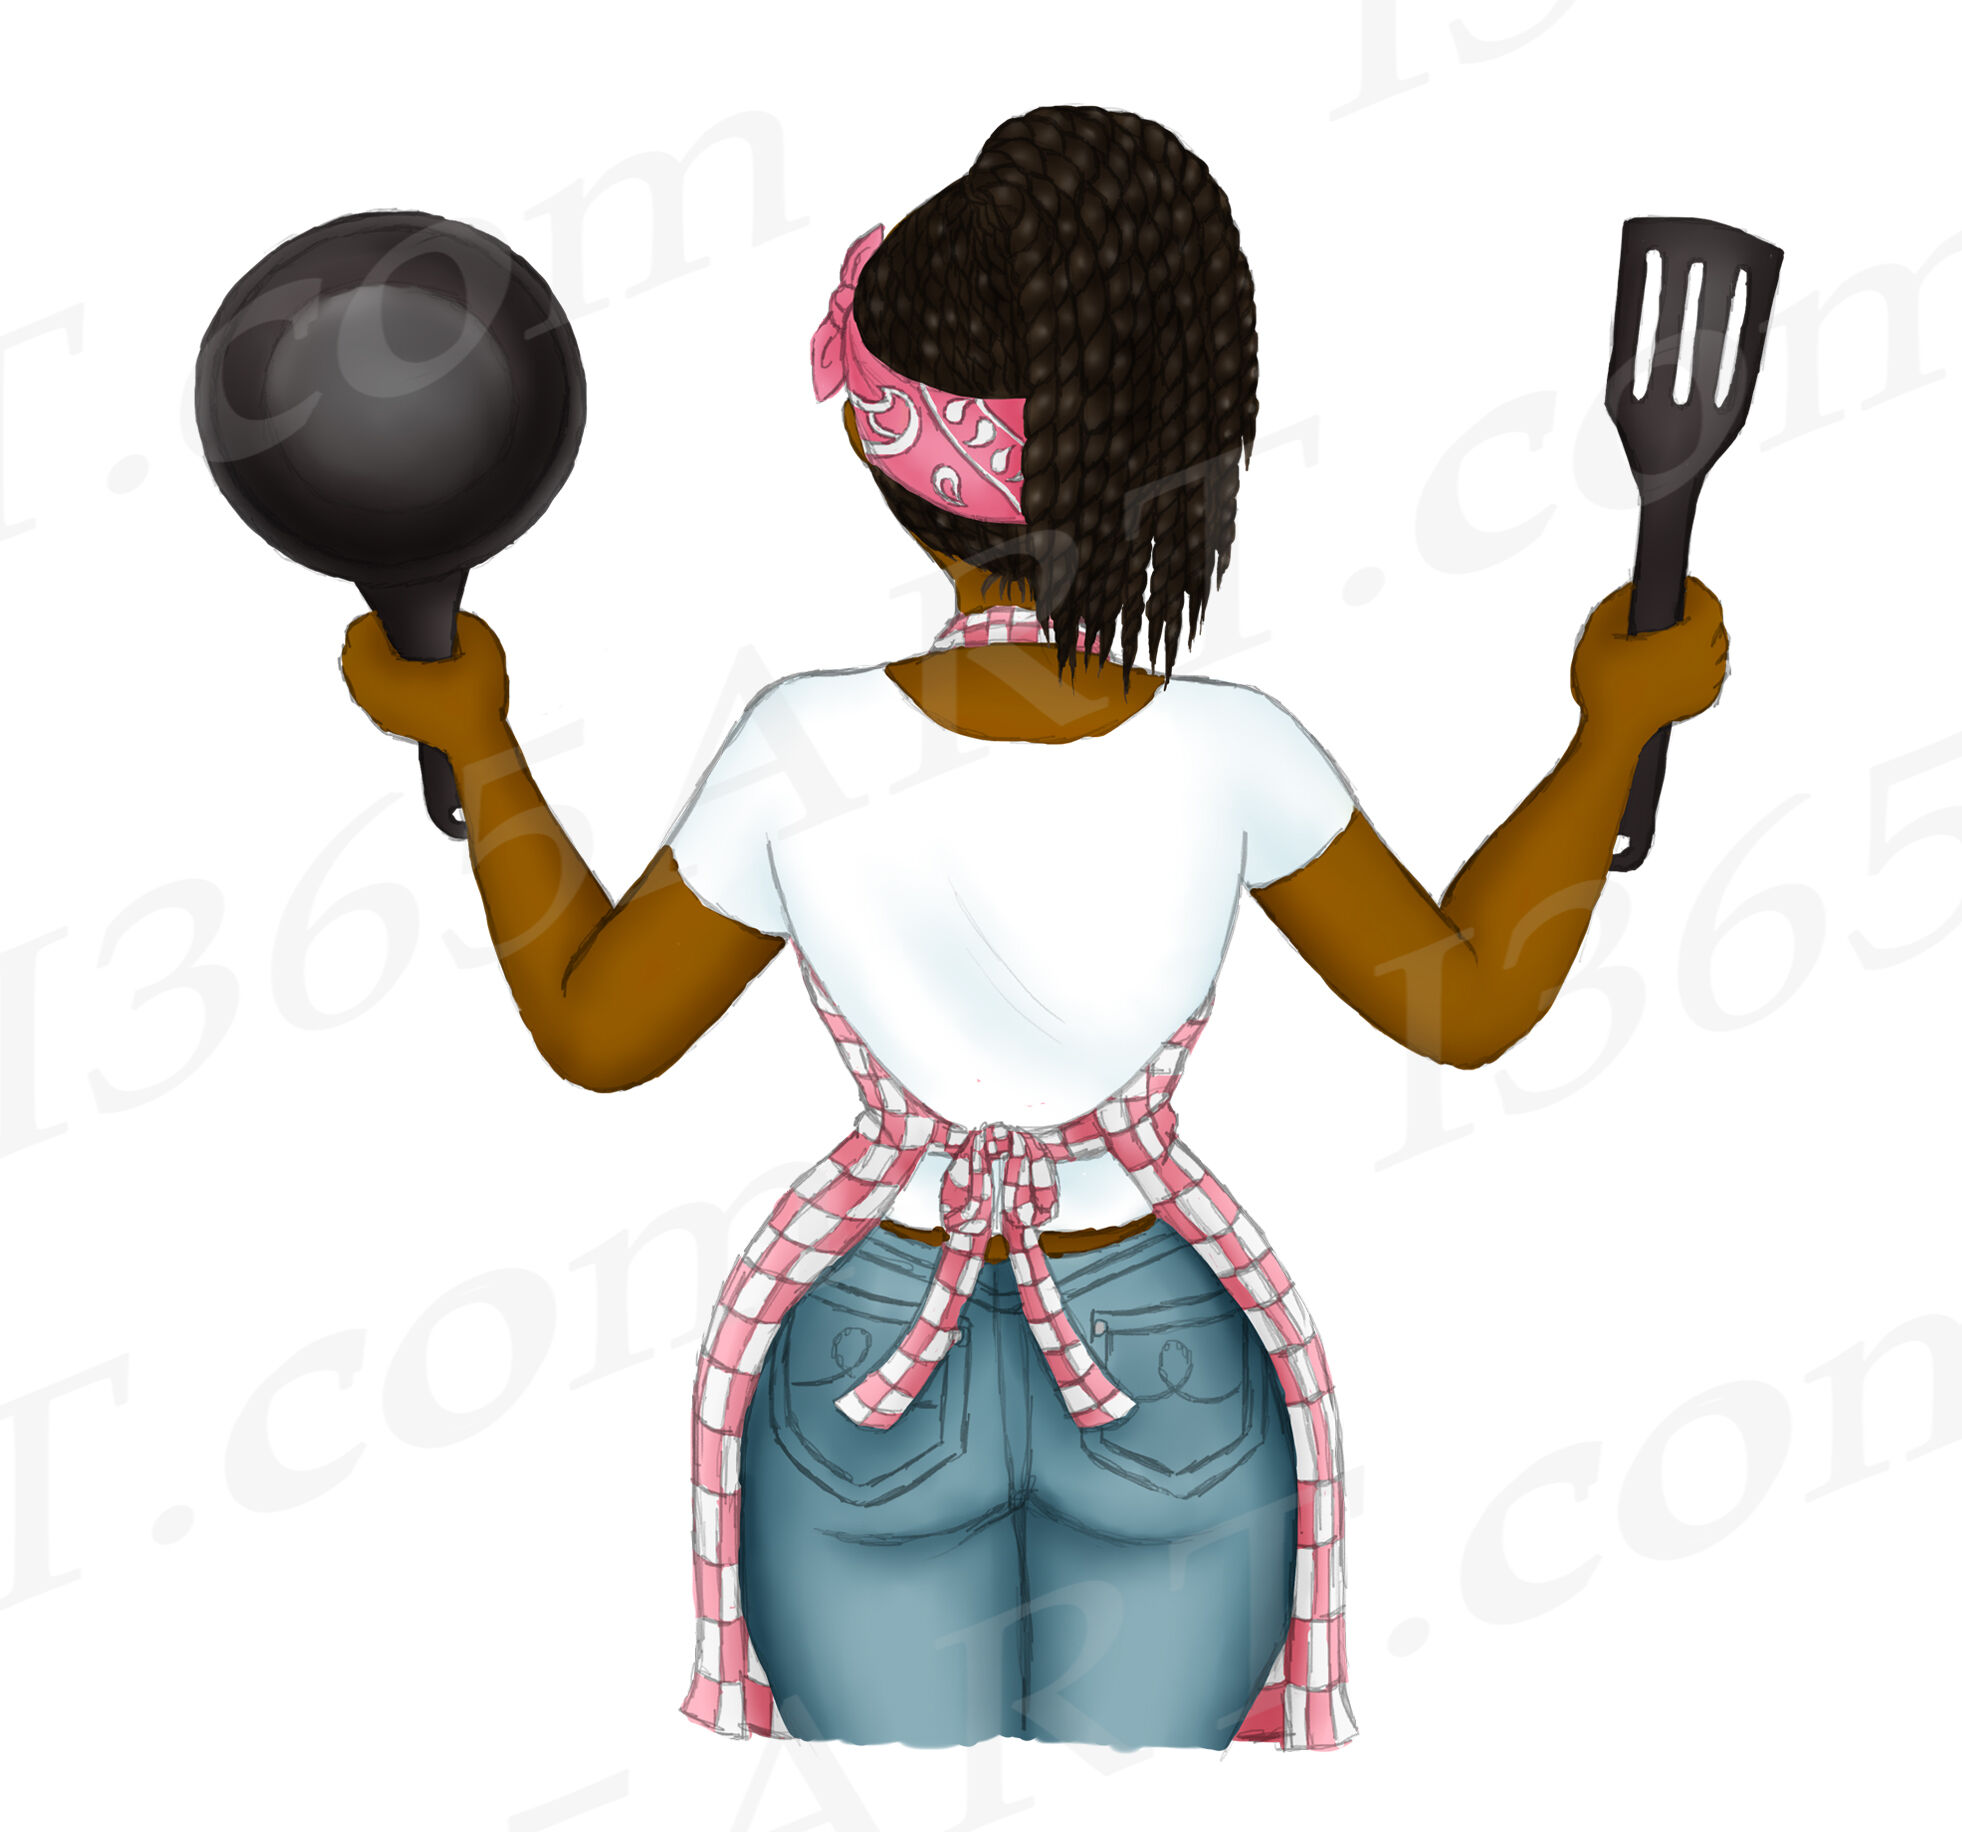 mexican woman cooking cartoon